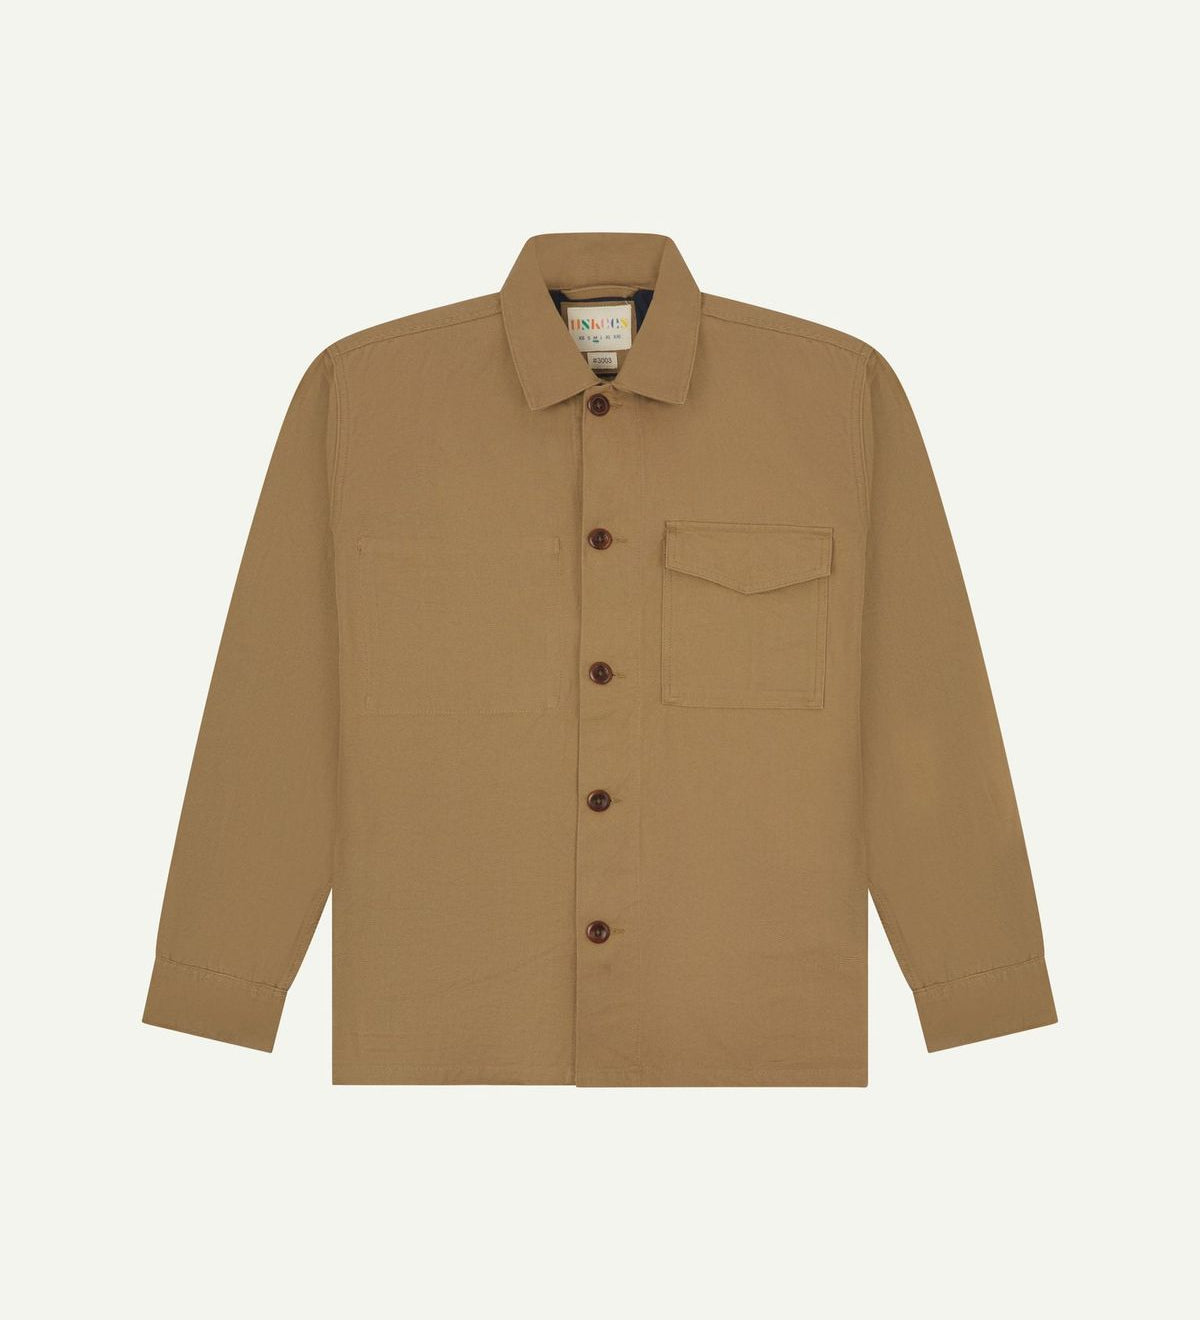 Khaki buttoned organic cotton workshirt from Uskees with clear view of chest pocket and Uskees branding label.